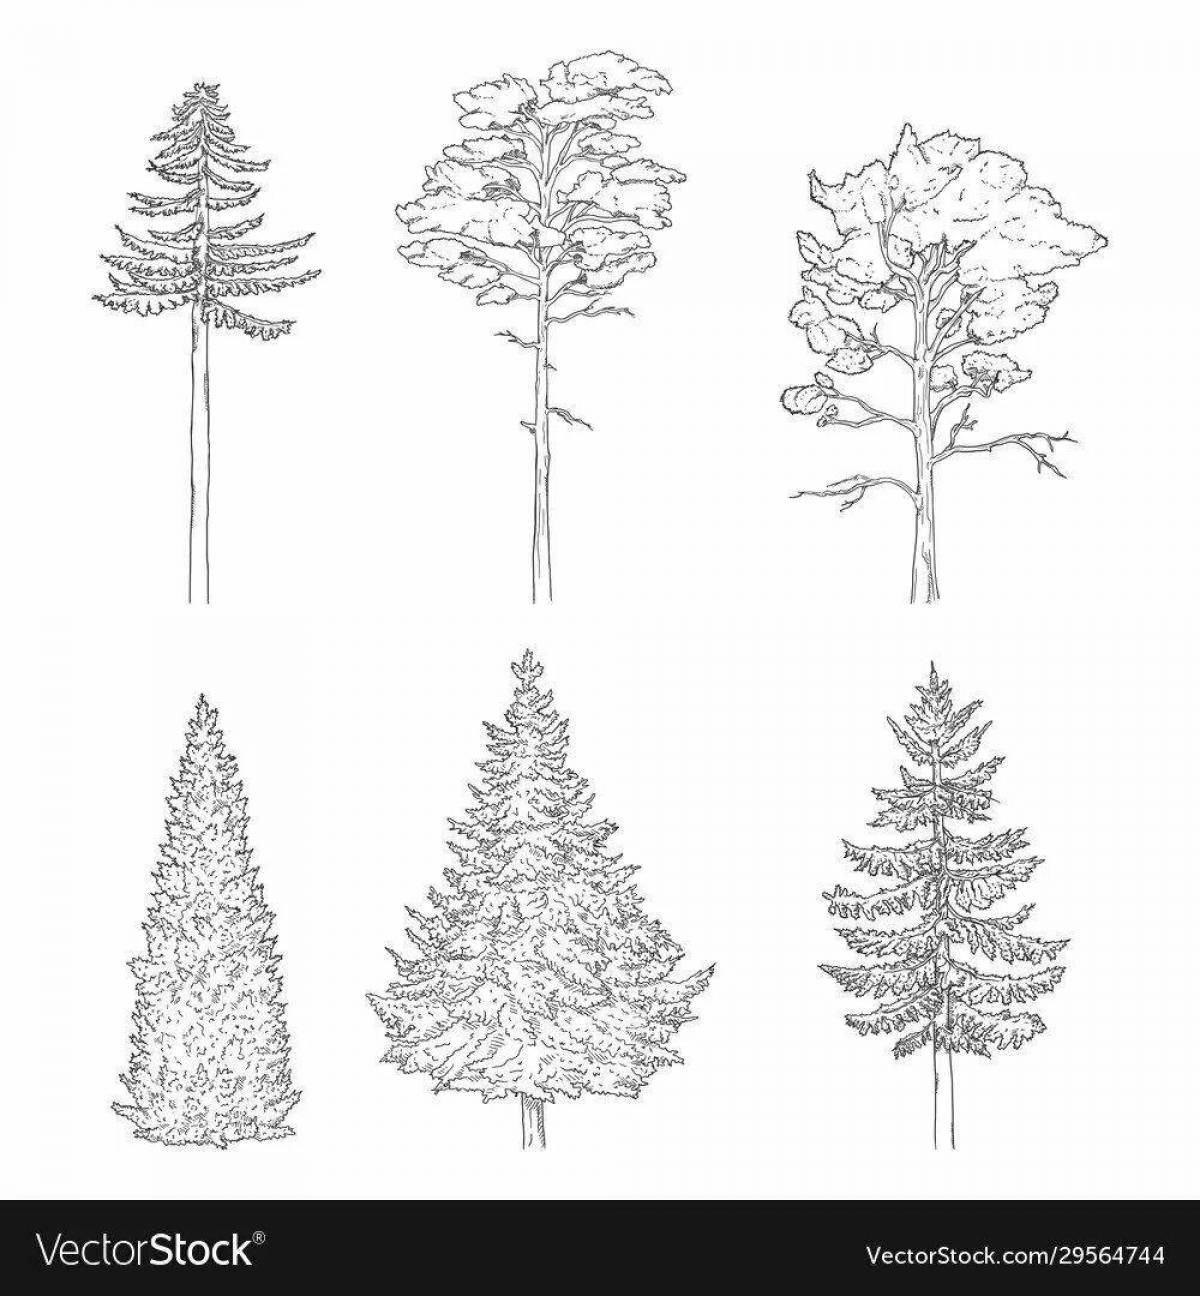 Charming pine tree coloring page